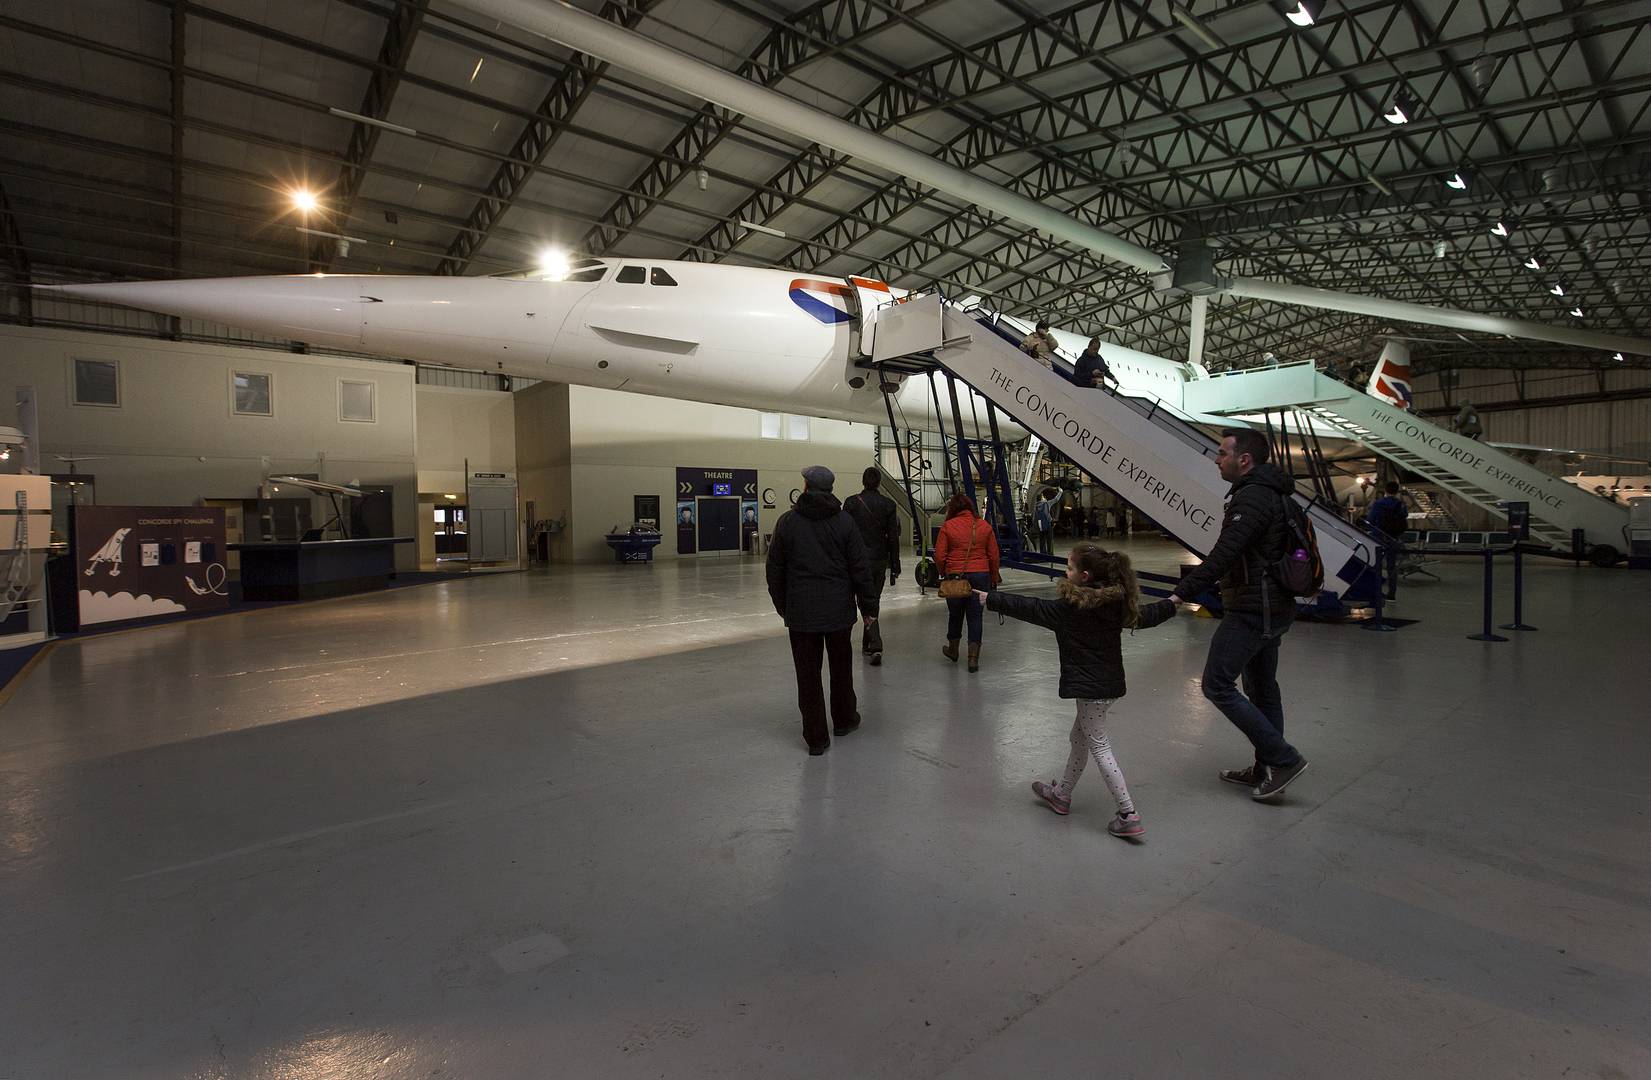 Visitors walk under the Concorde aircraft on display indoors at the National Museum of Flight., Image © Ruth Armstrong Photography